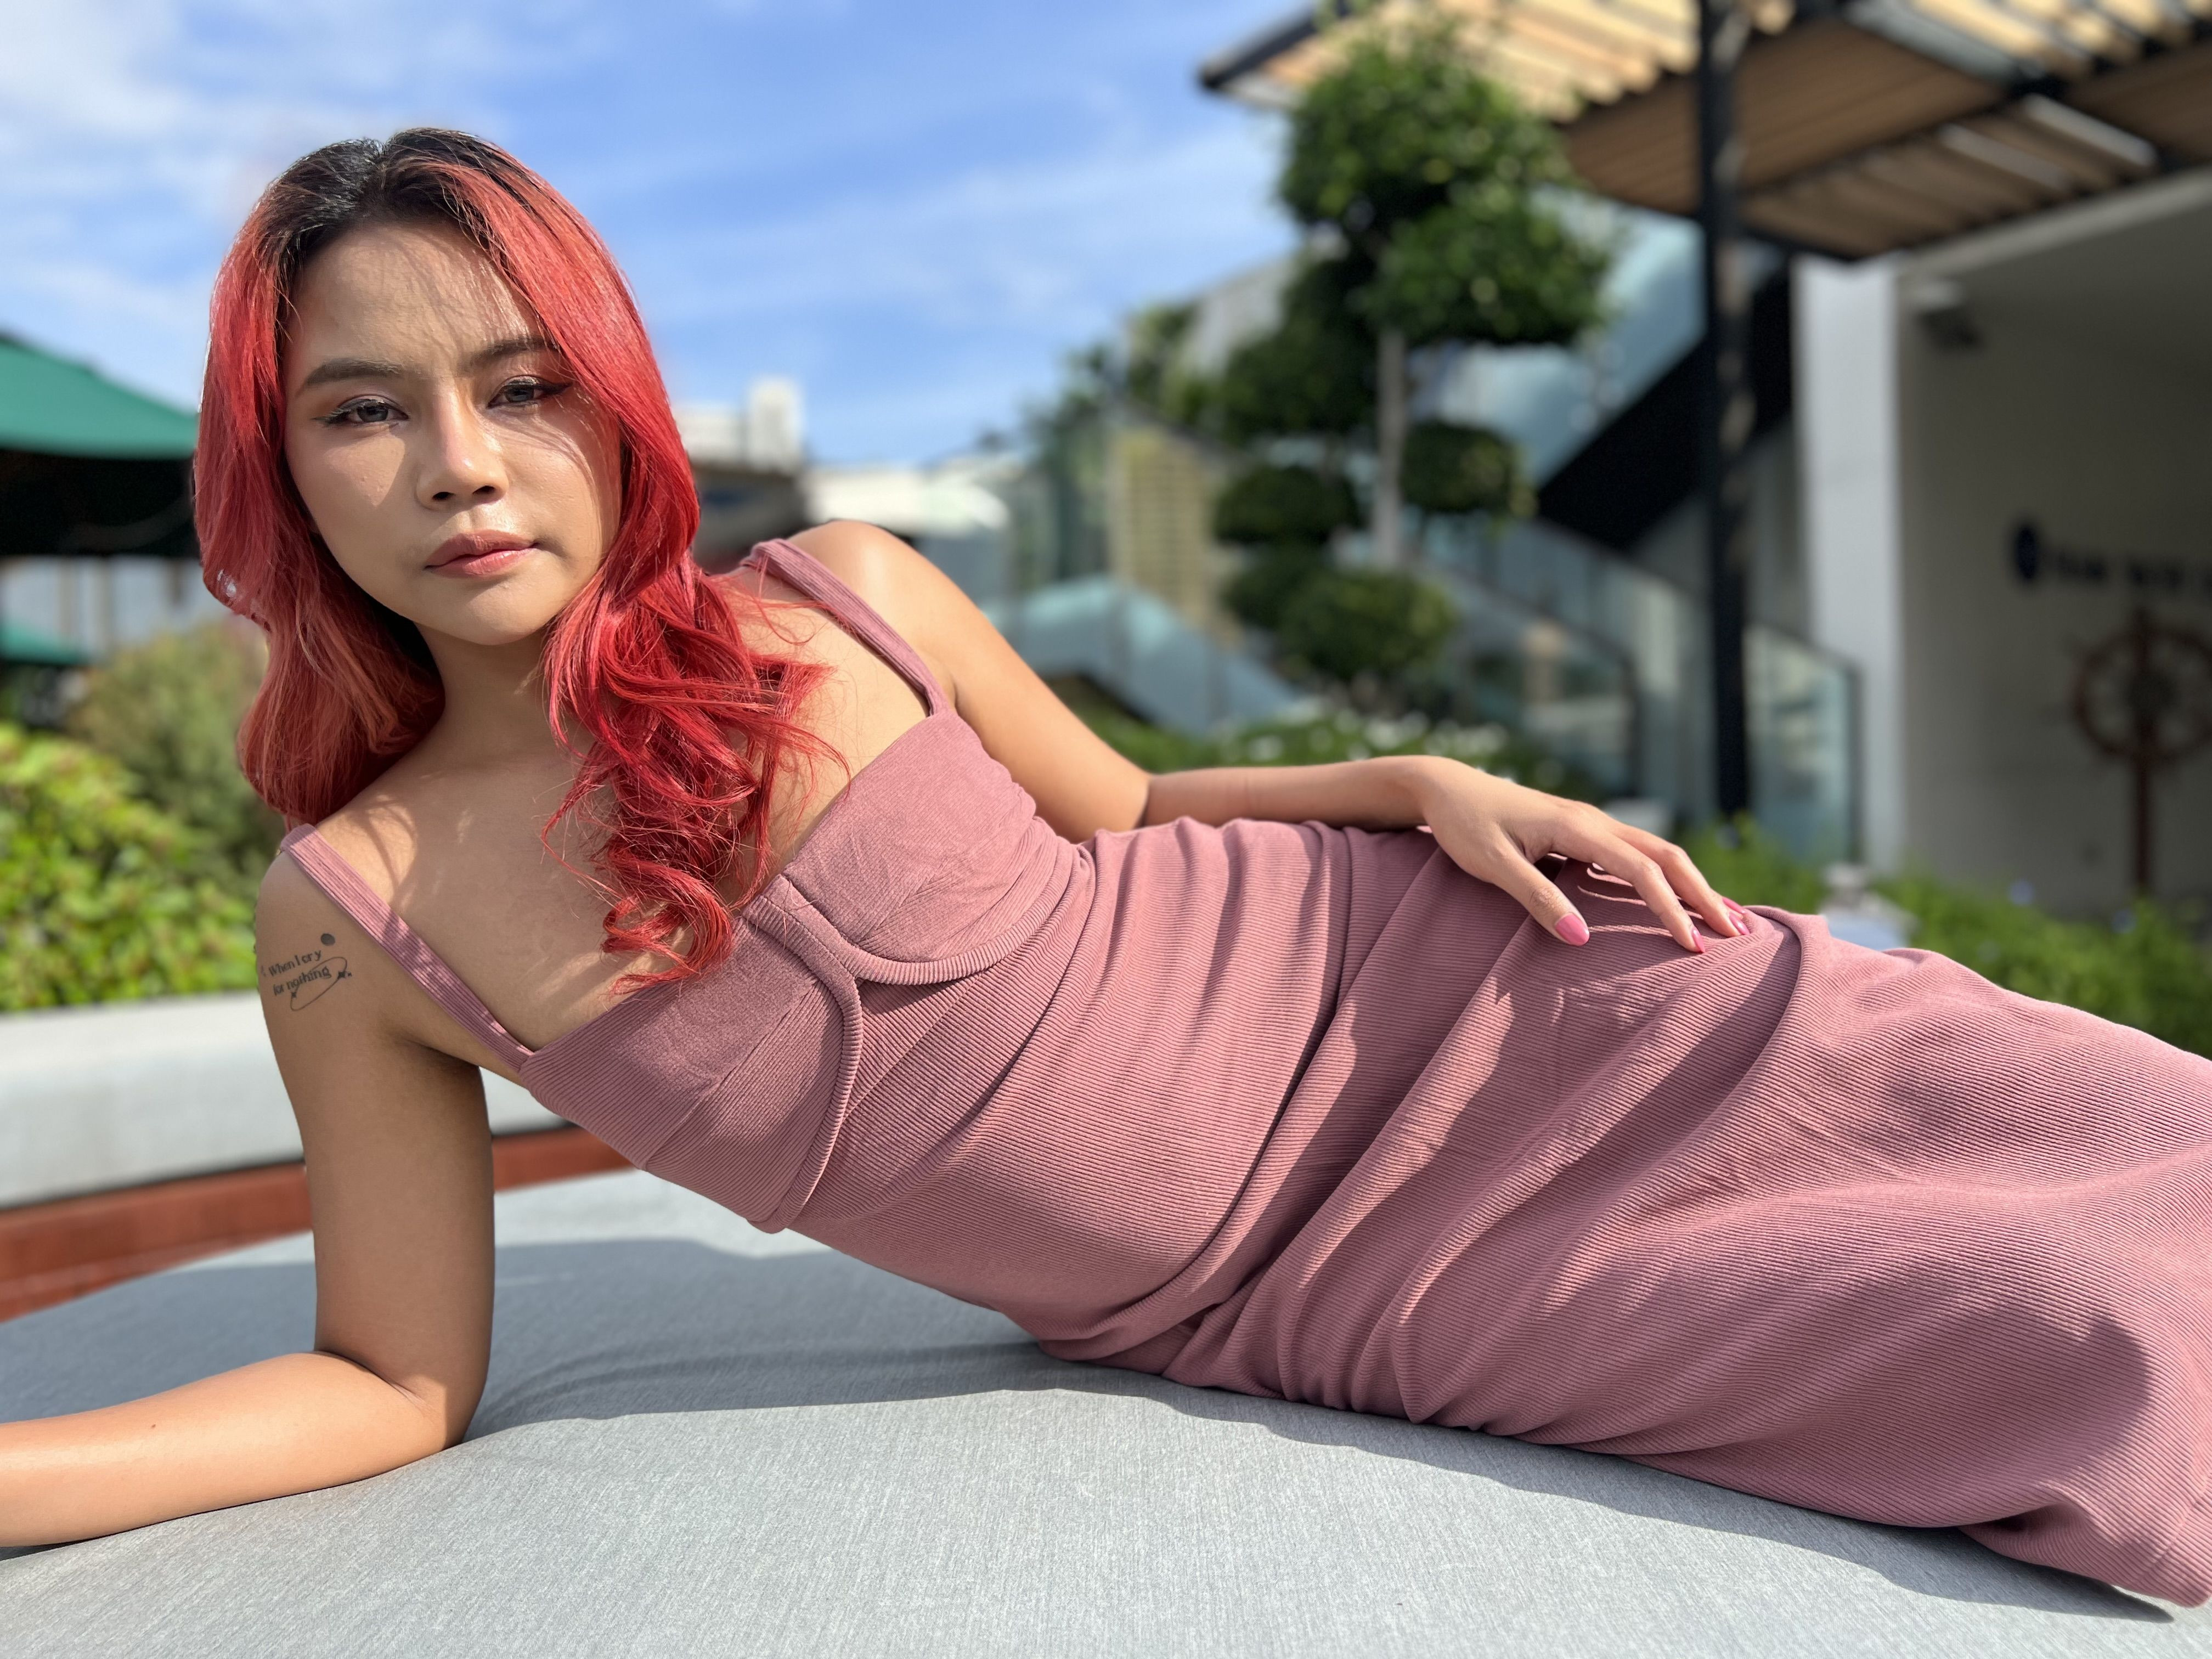 Thai student with red hair loves modeling and tourists Slideshow